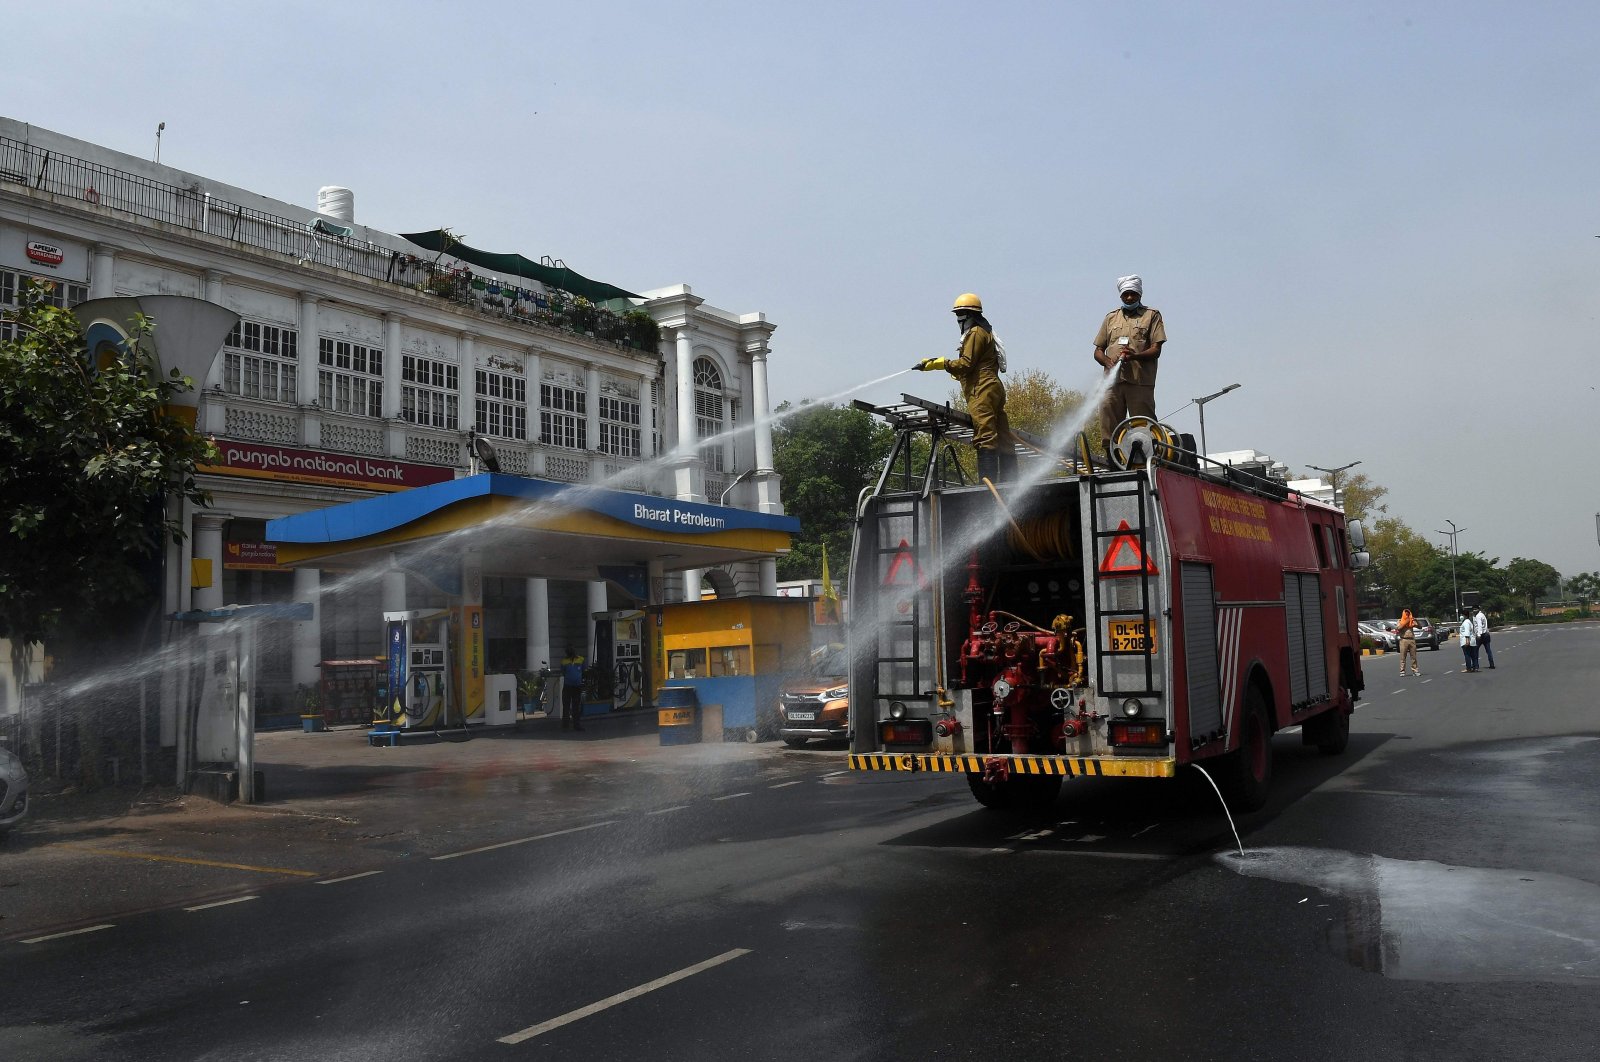 Delhi Fire Service (DFS) personnel spray disinfectant chemicals along a road during a government-imposed nationwide lockdown as a preventive measure against the COVID-19 coronavirus in New Delhi on April 16, 2020. (AFP Photo)